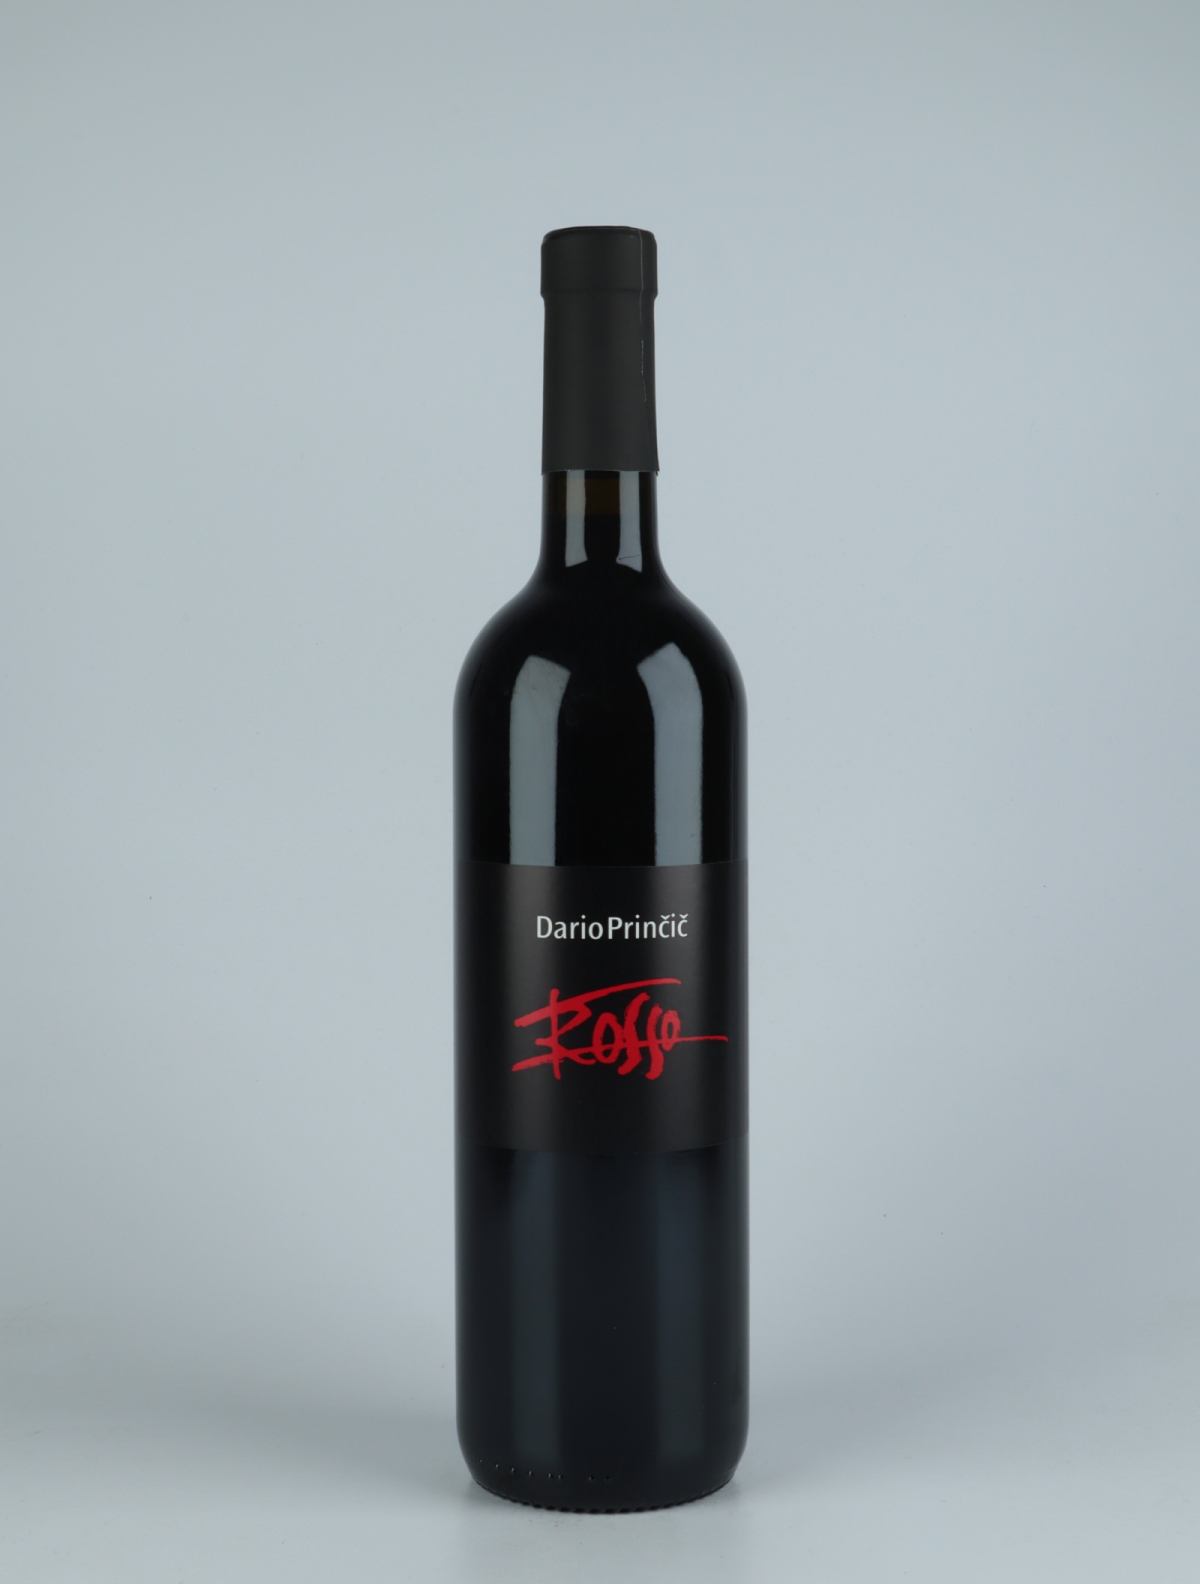 A bottle 2019 Rosso Red wine from Dario Princic, Friuli in Italy